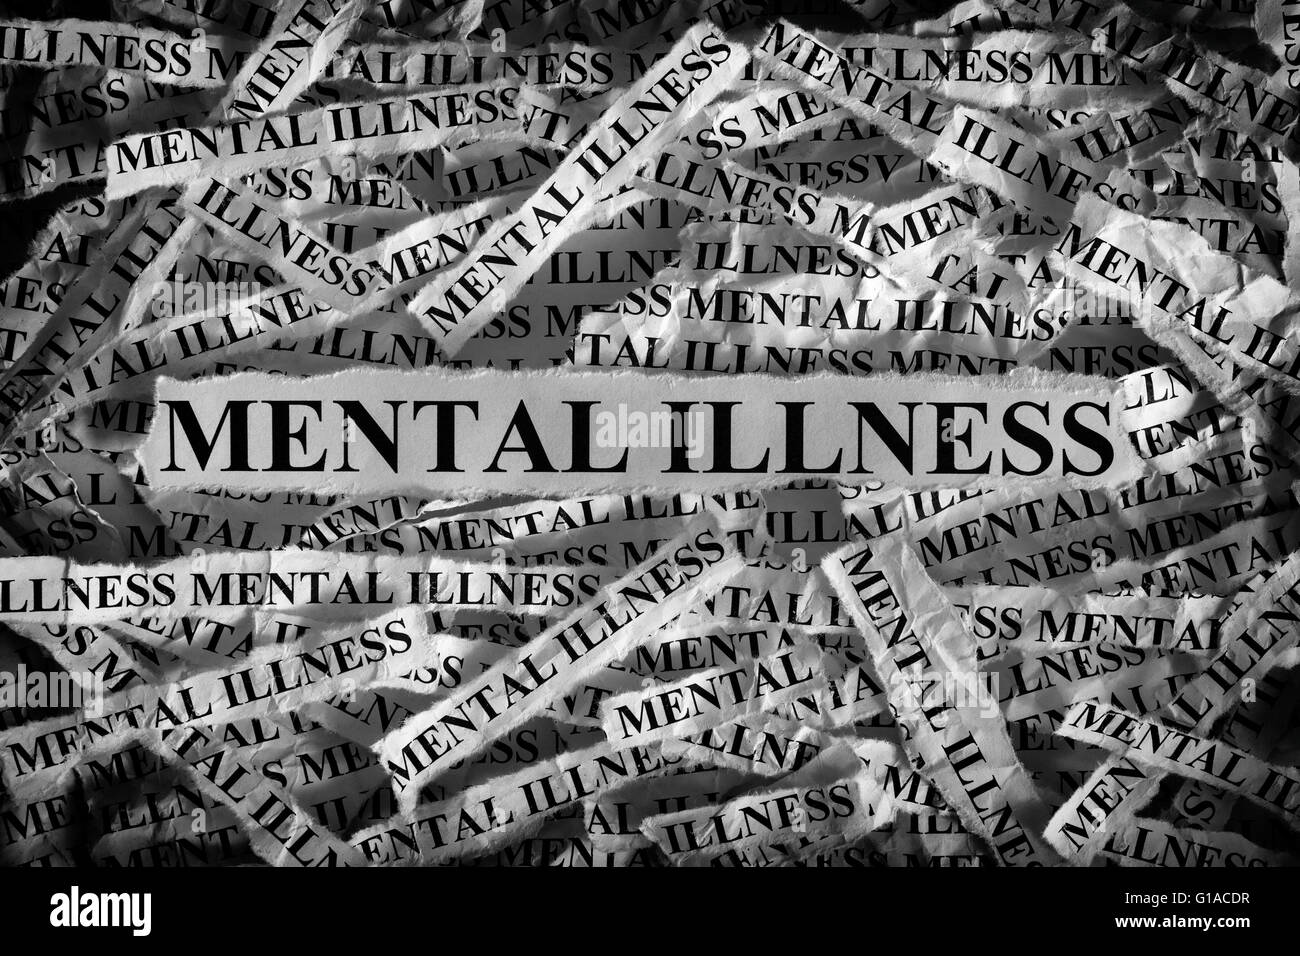 Mental illness. Torn pieces of paper with the words Mental illness. Concept Image. Black and White. Closeup. Stock Photo